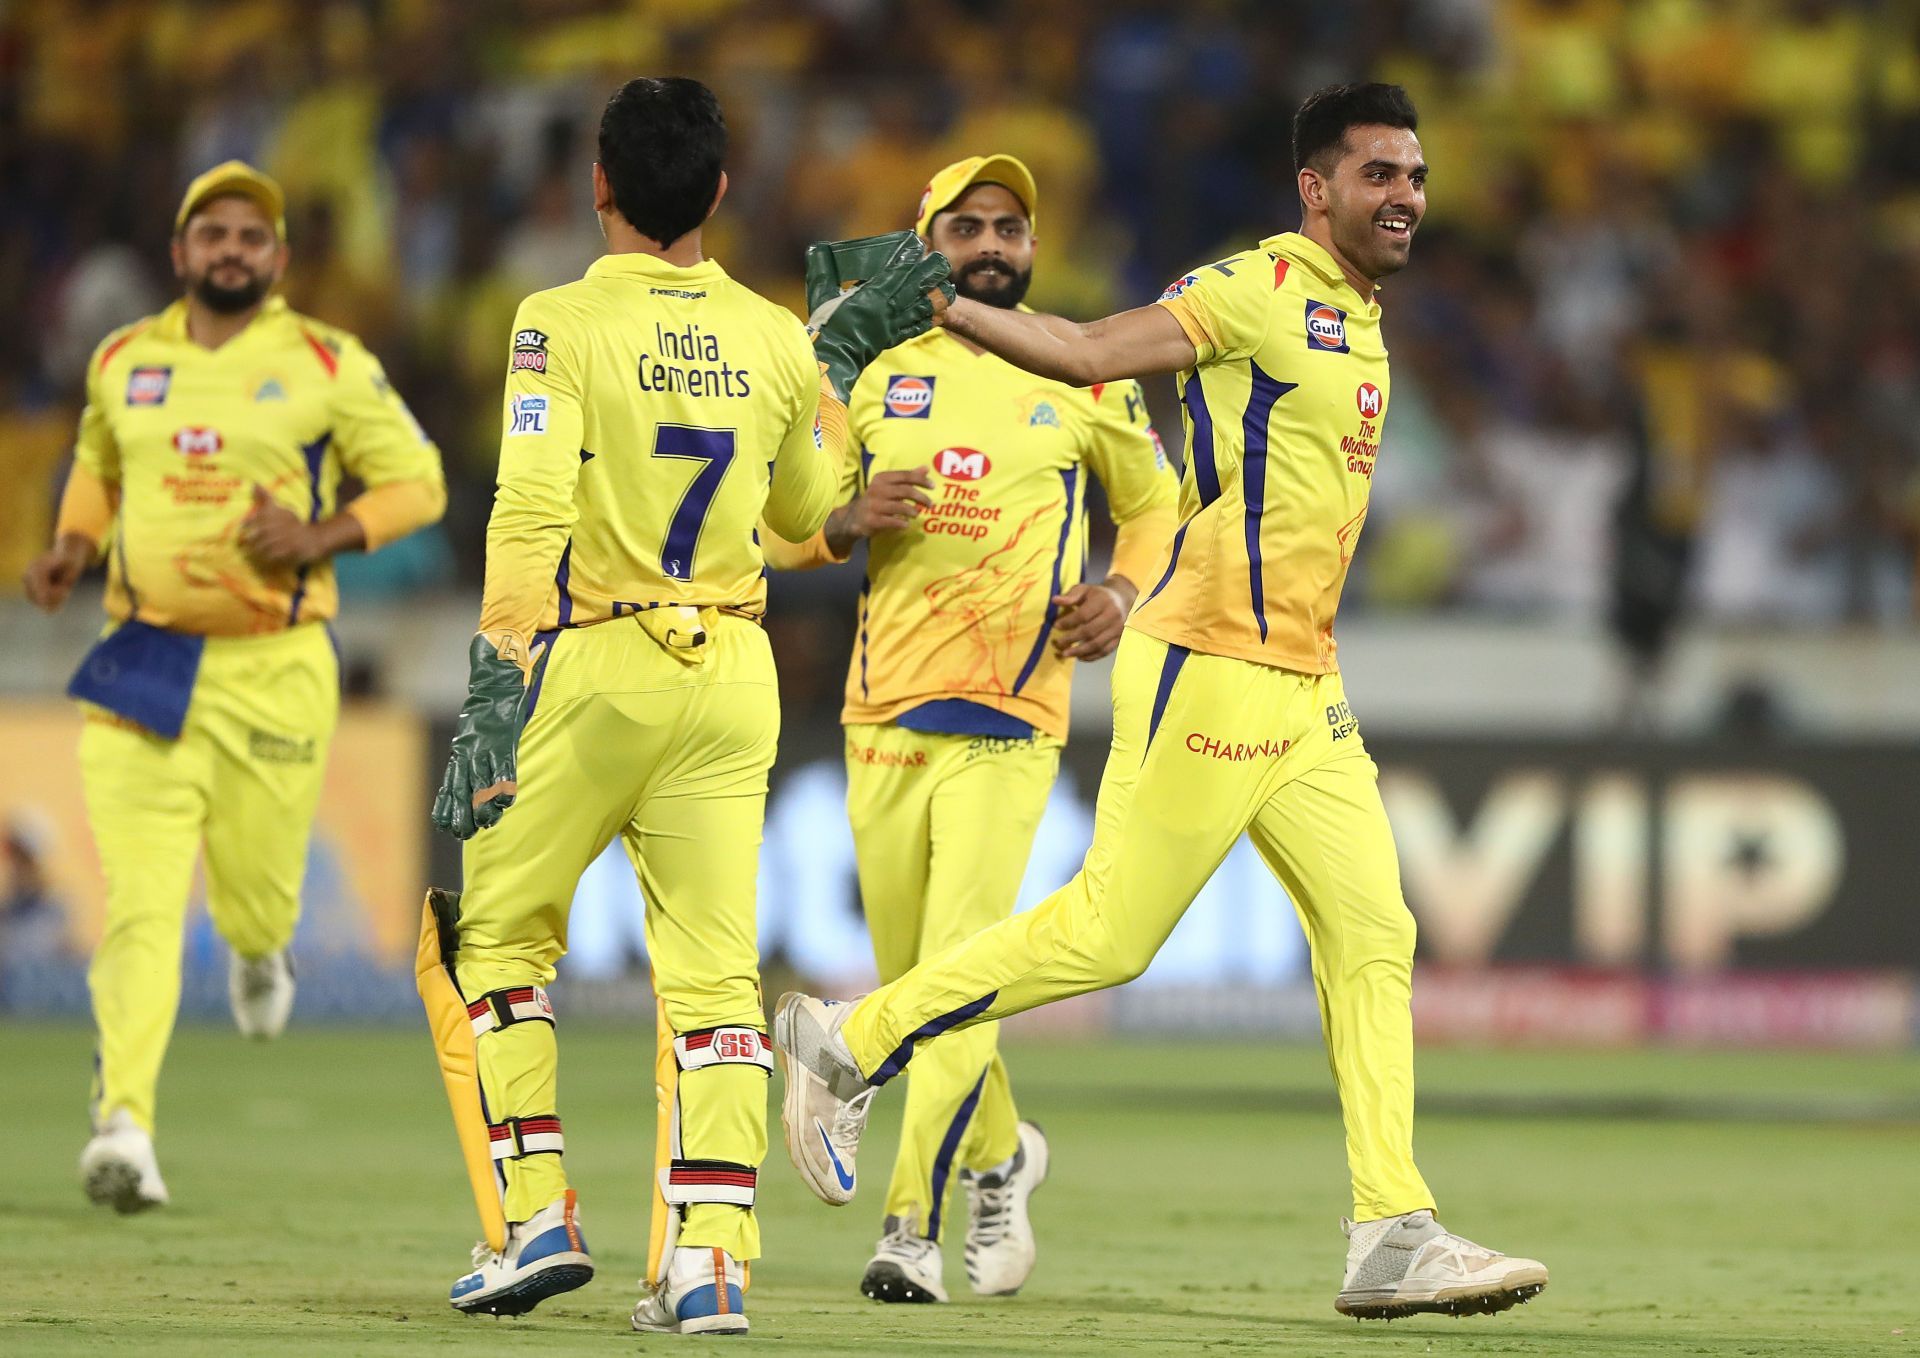 CSK were out of sorts in IPL 2022